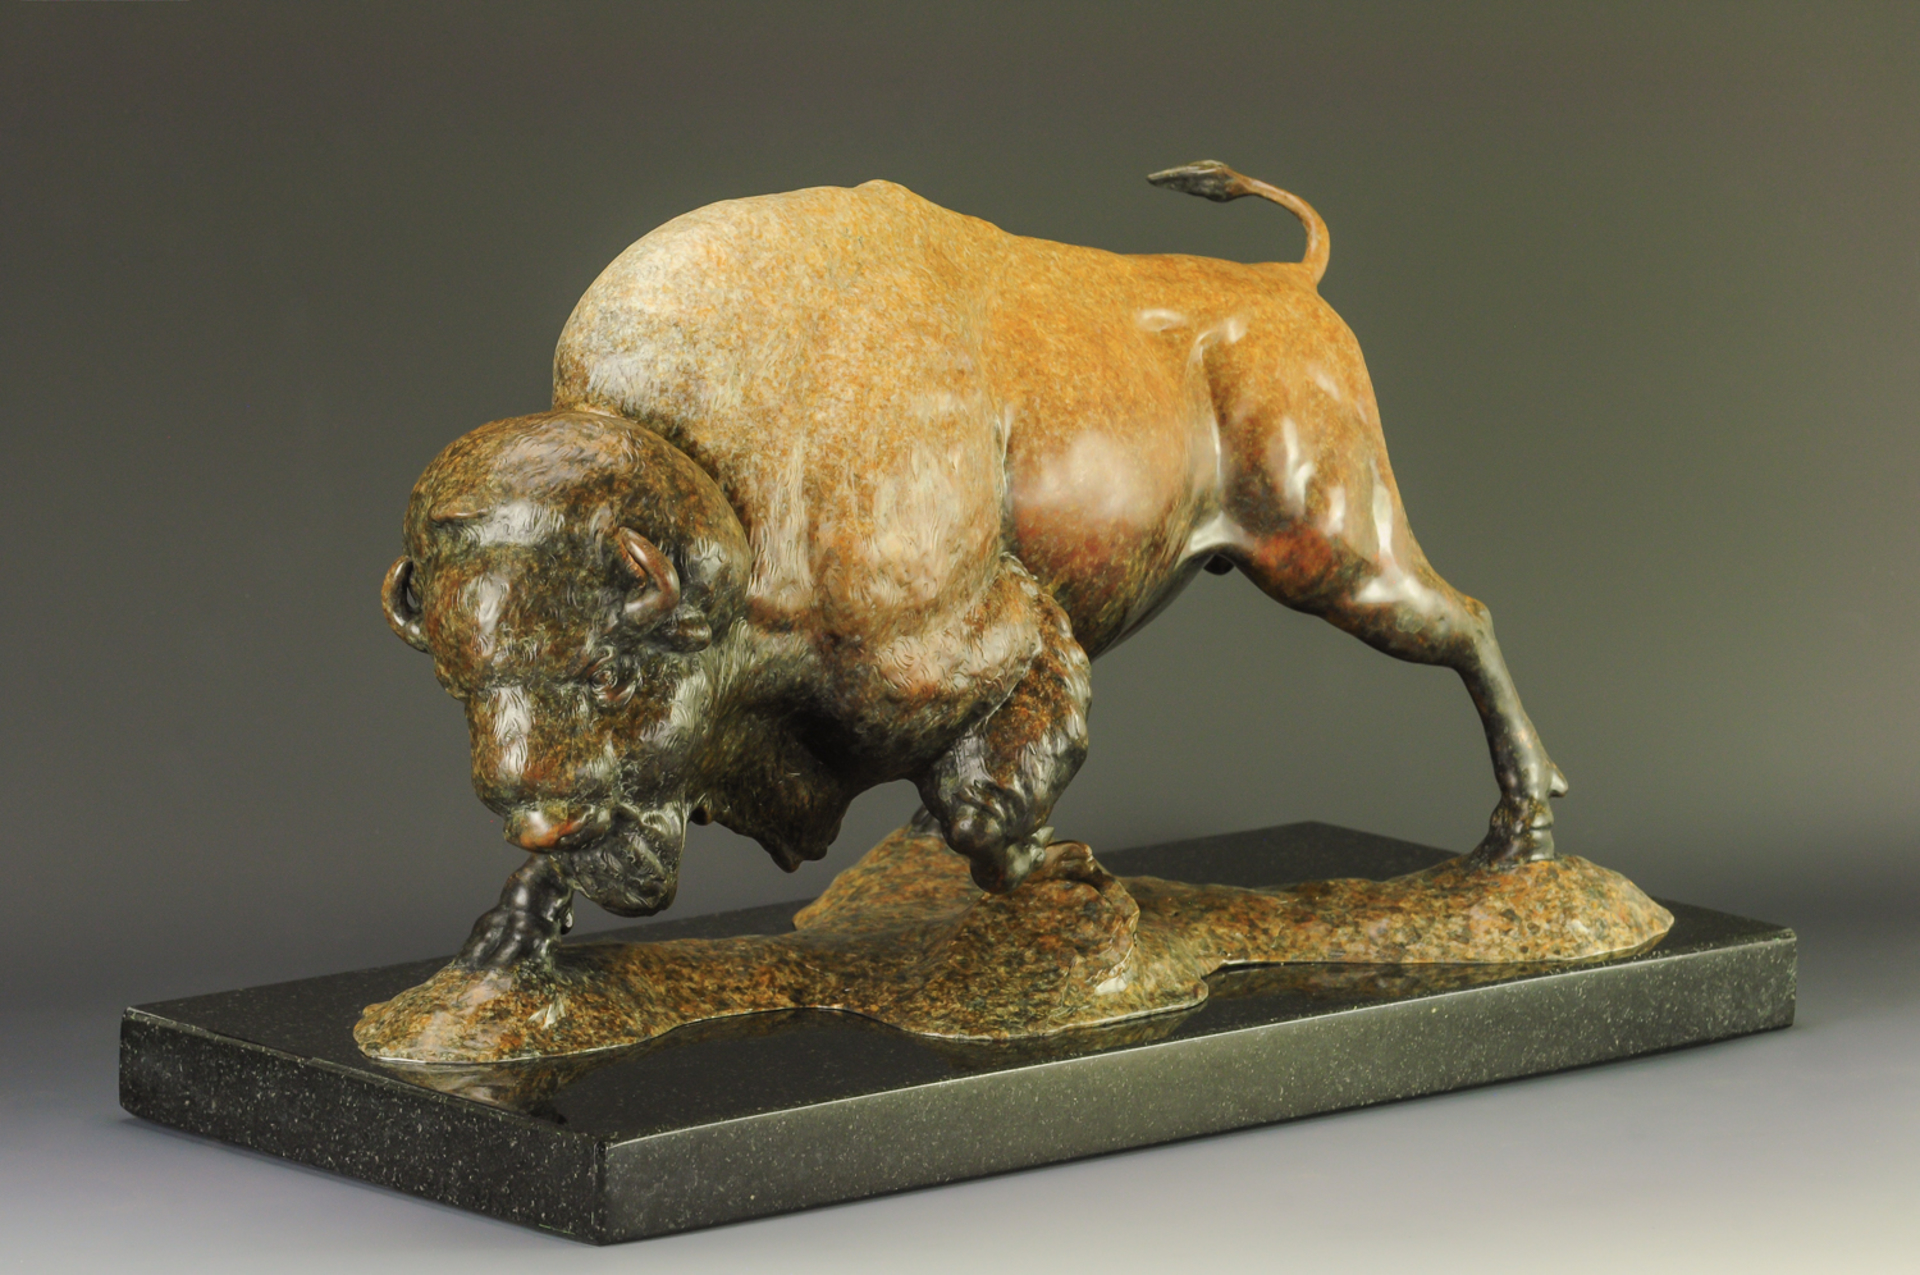 A Fine Art Sculpture In Bronze By Jeremy Bradshaw Featuring A Charging Bison, Available At Gallery Wild